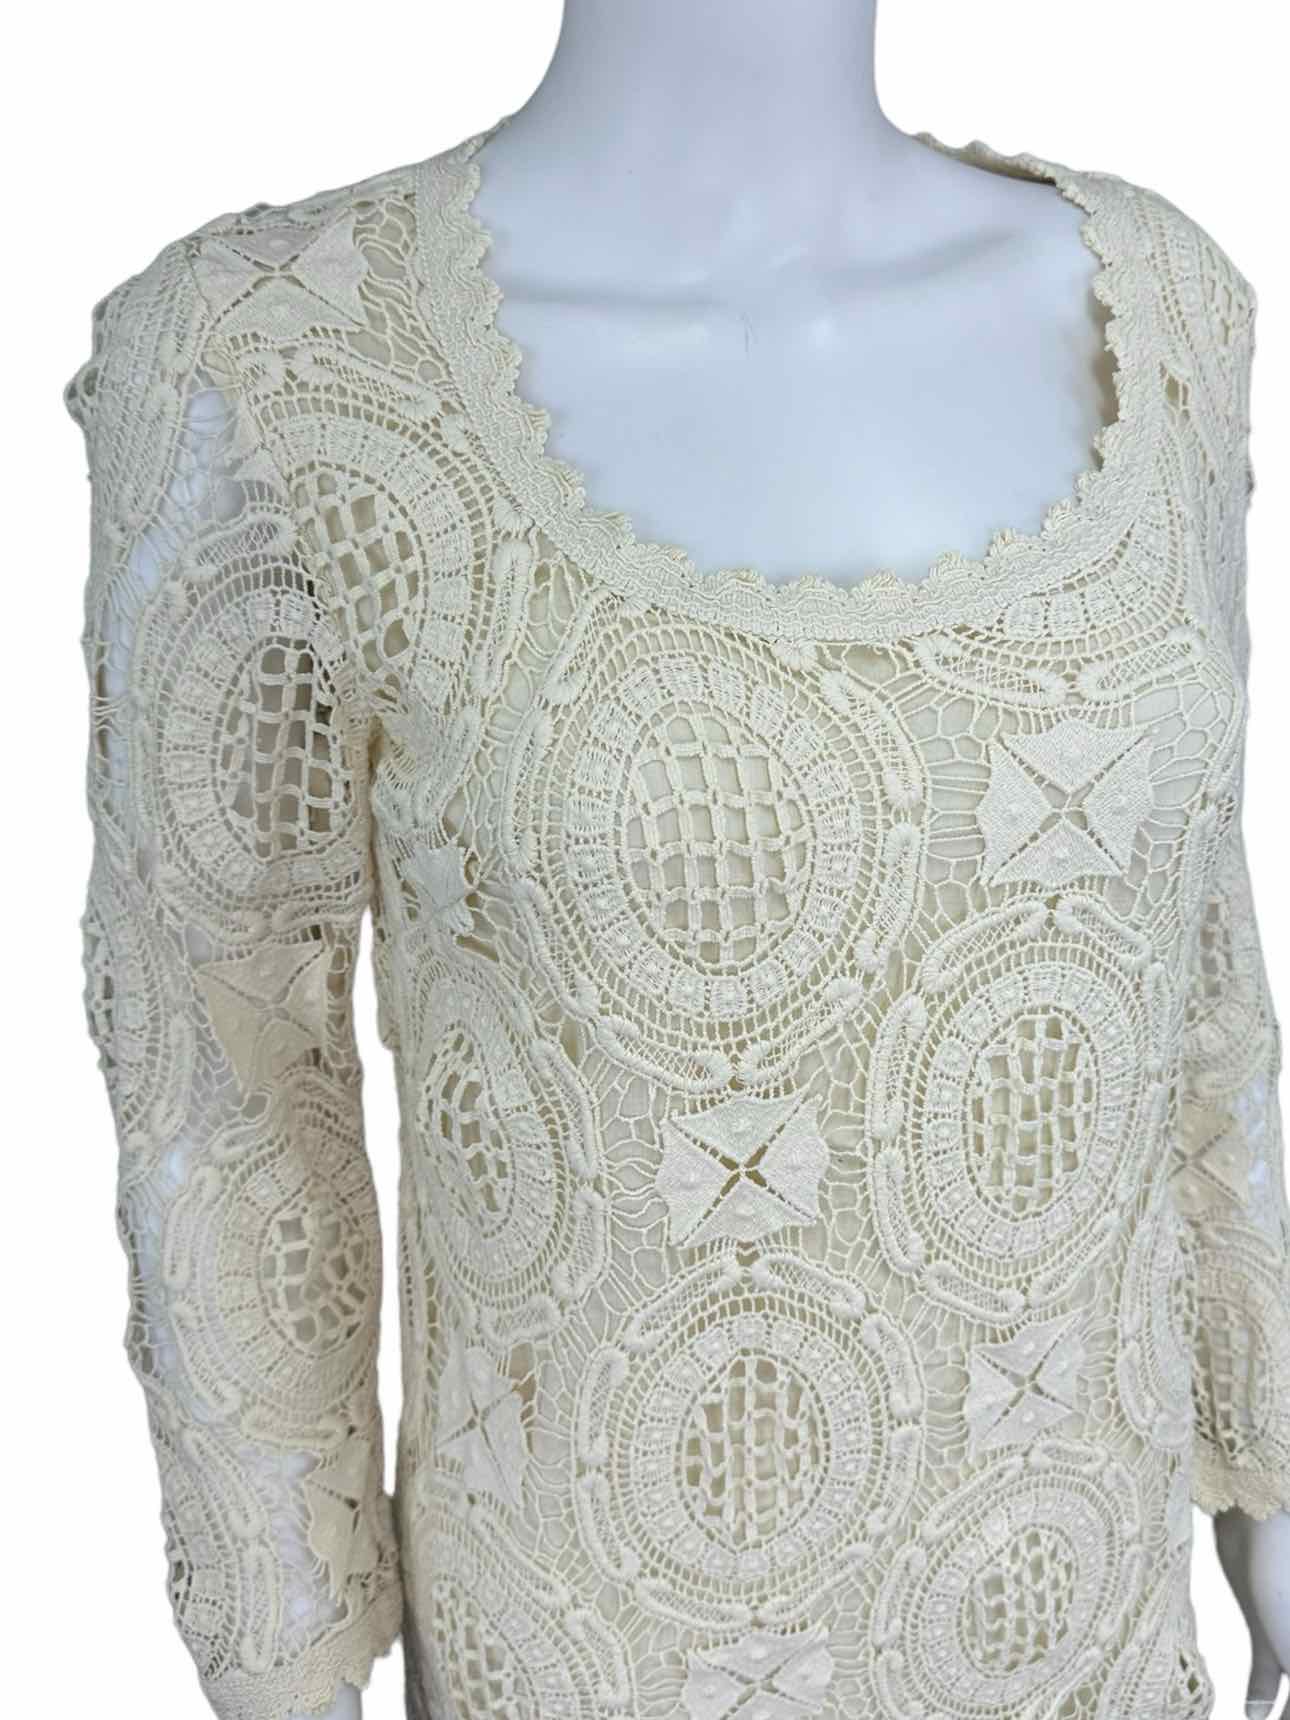 French Connection Cream Crochet Dress Size 4